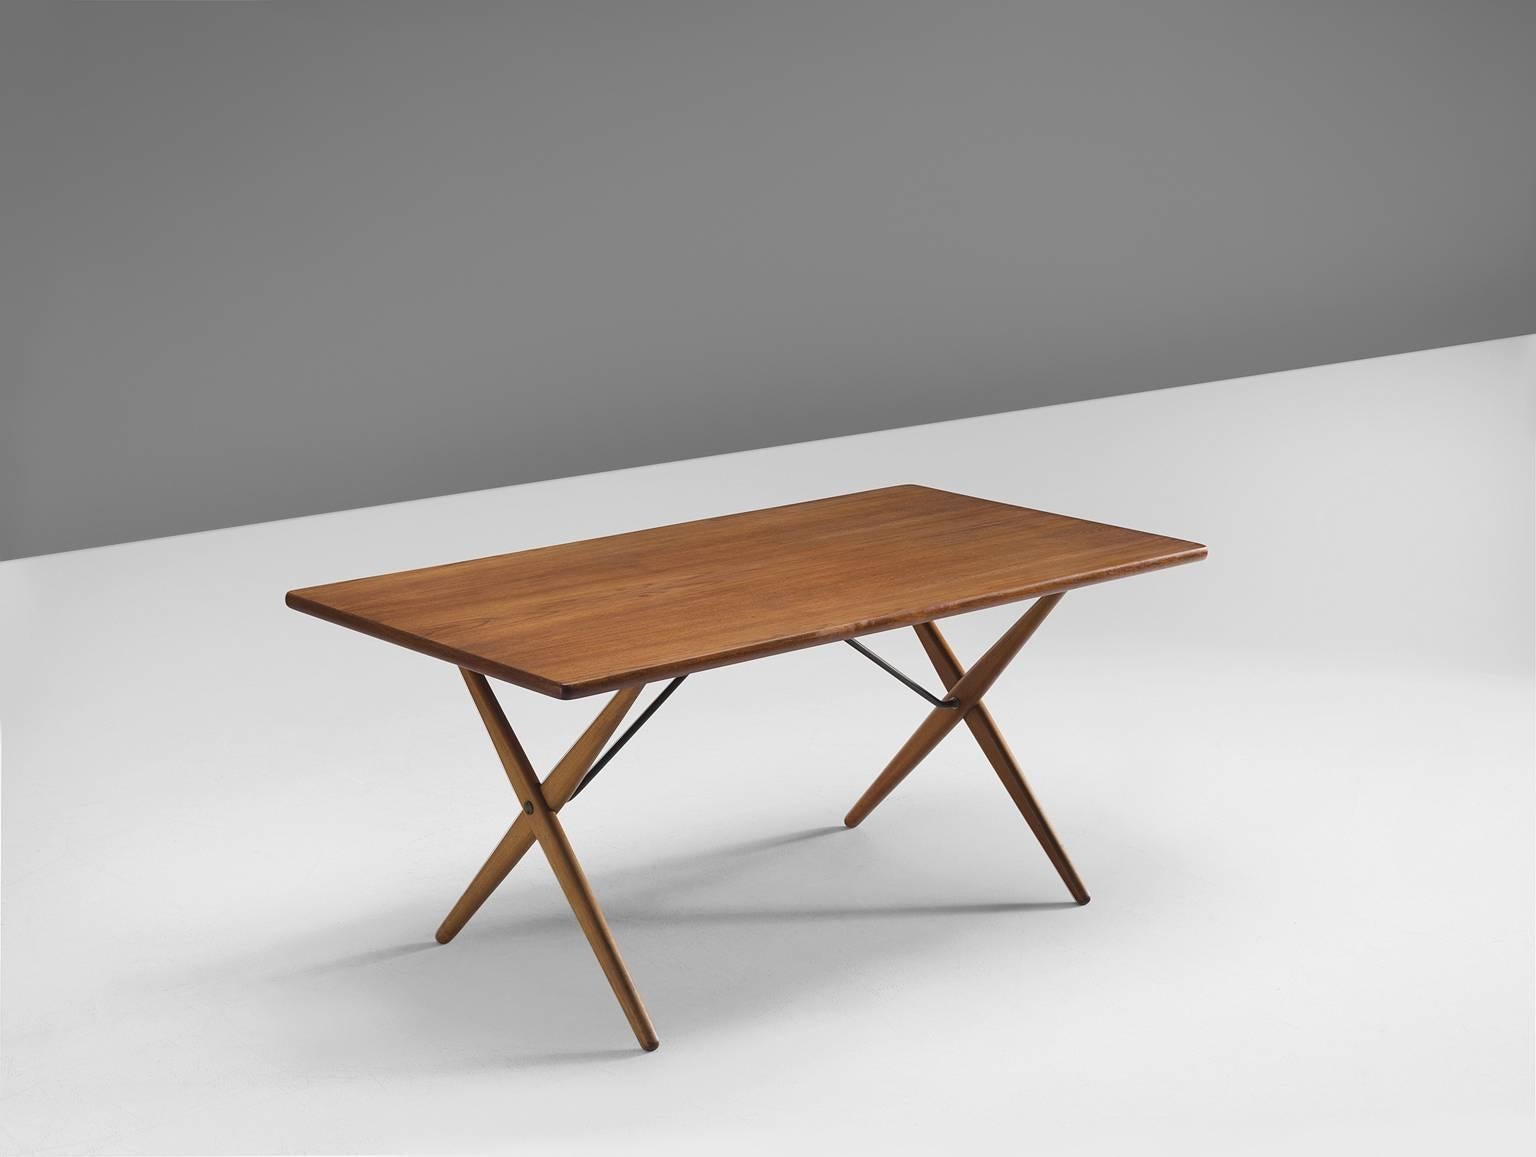 Table model AT-303, in teak, oak and metal, by Hans J. Wegner for Andreas Tuck, Denmark, 1955.

Dining table with elegant X-shaped legs, by Danish Designer Hans Wegner. This table is considered as one of the best known designs from Wenger. From a